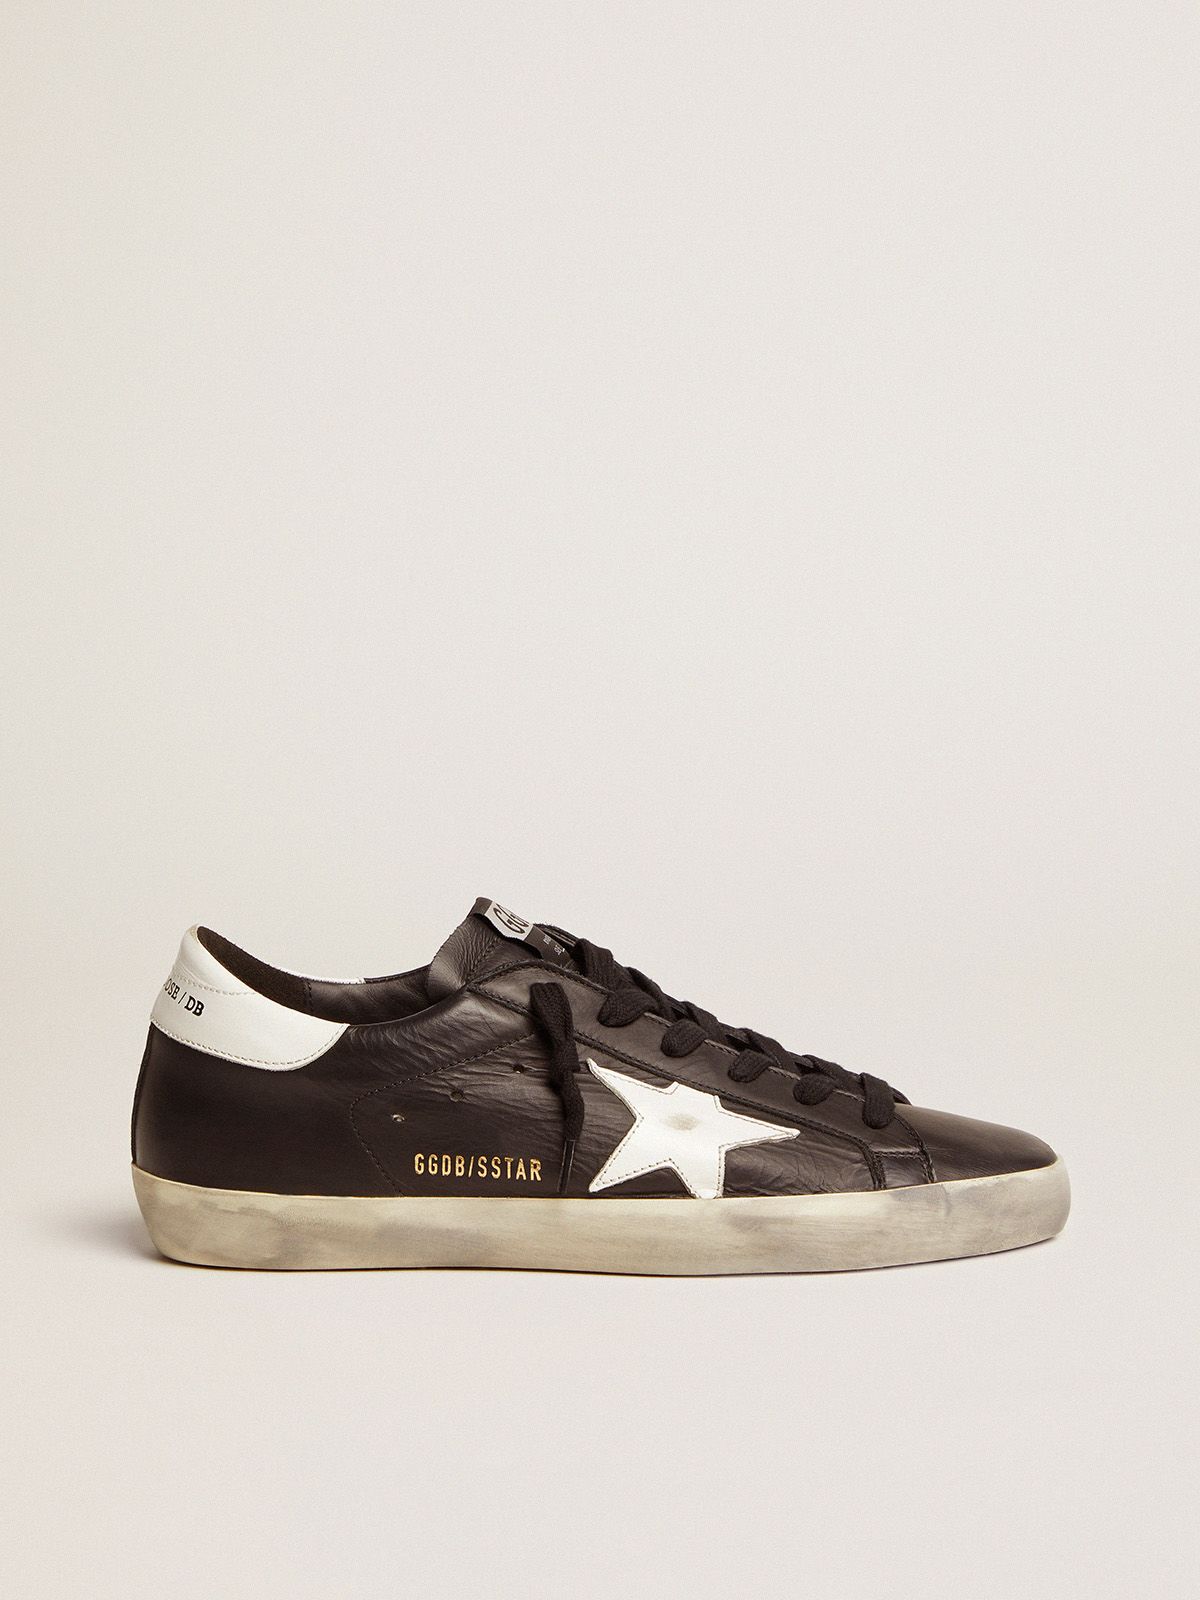 golden goose in star leather heel and sneakers tab Superstar contrast with